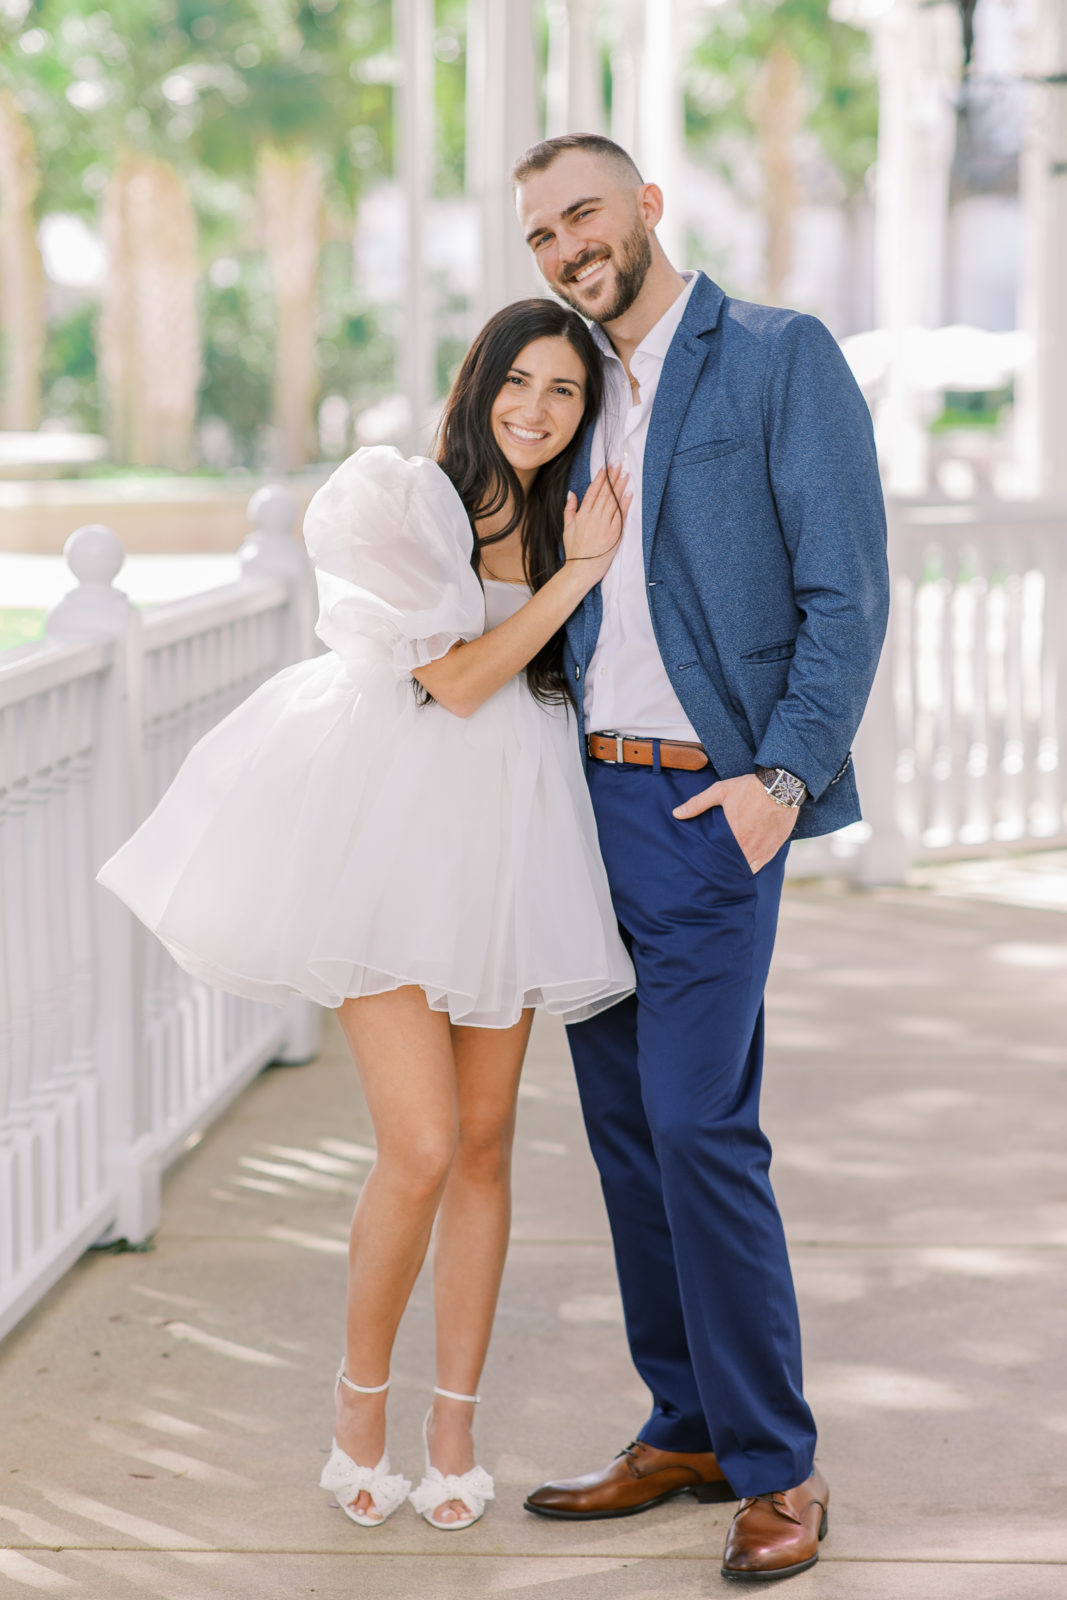 Disney Grand Floridian Engagement Session with groom in blue suit and bride in stylish selkie dress